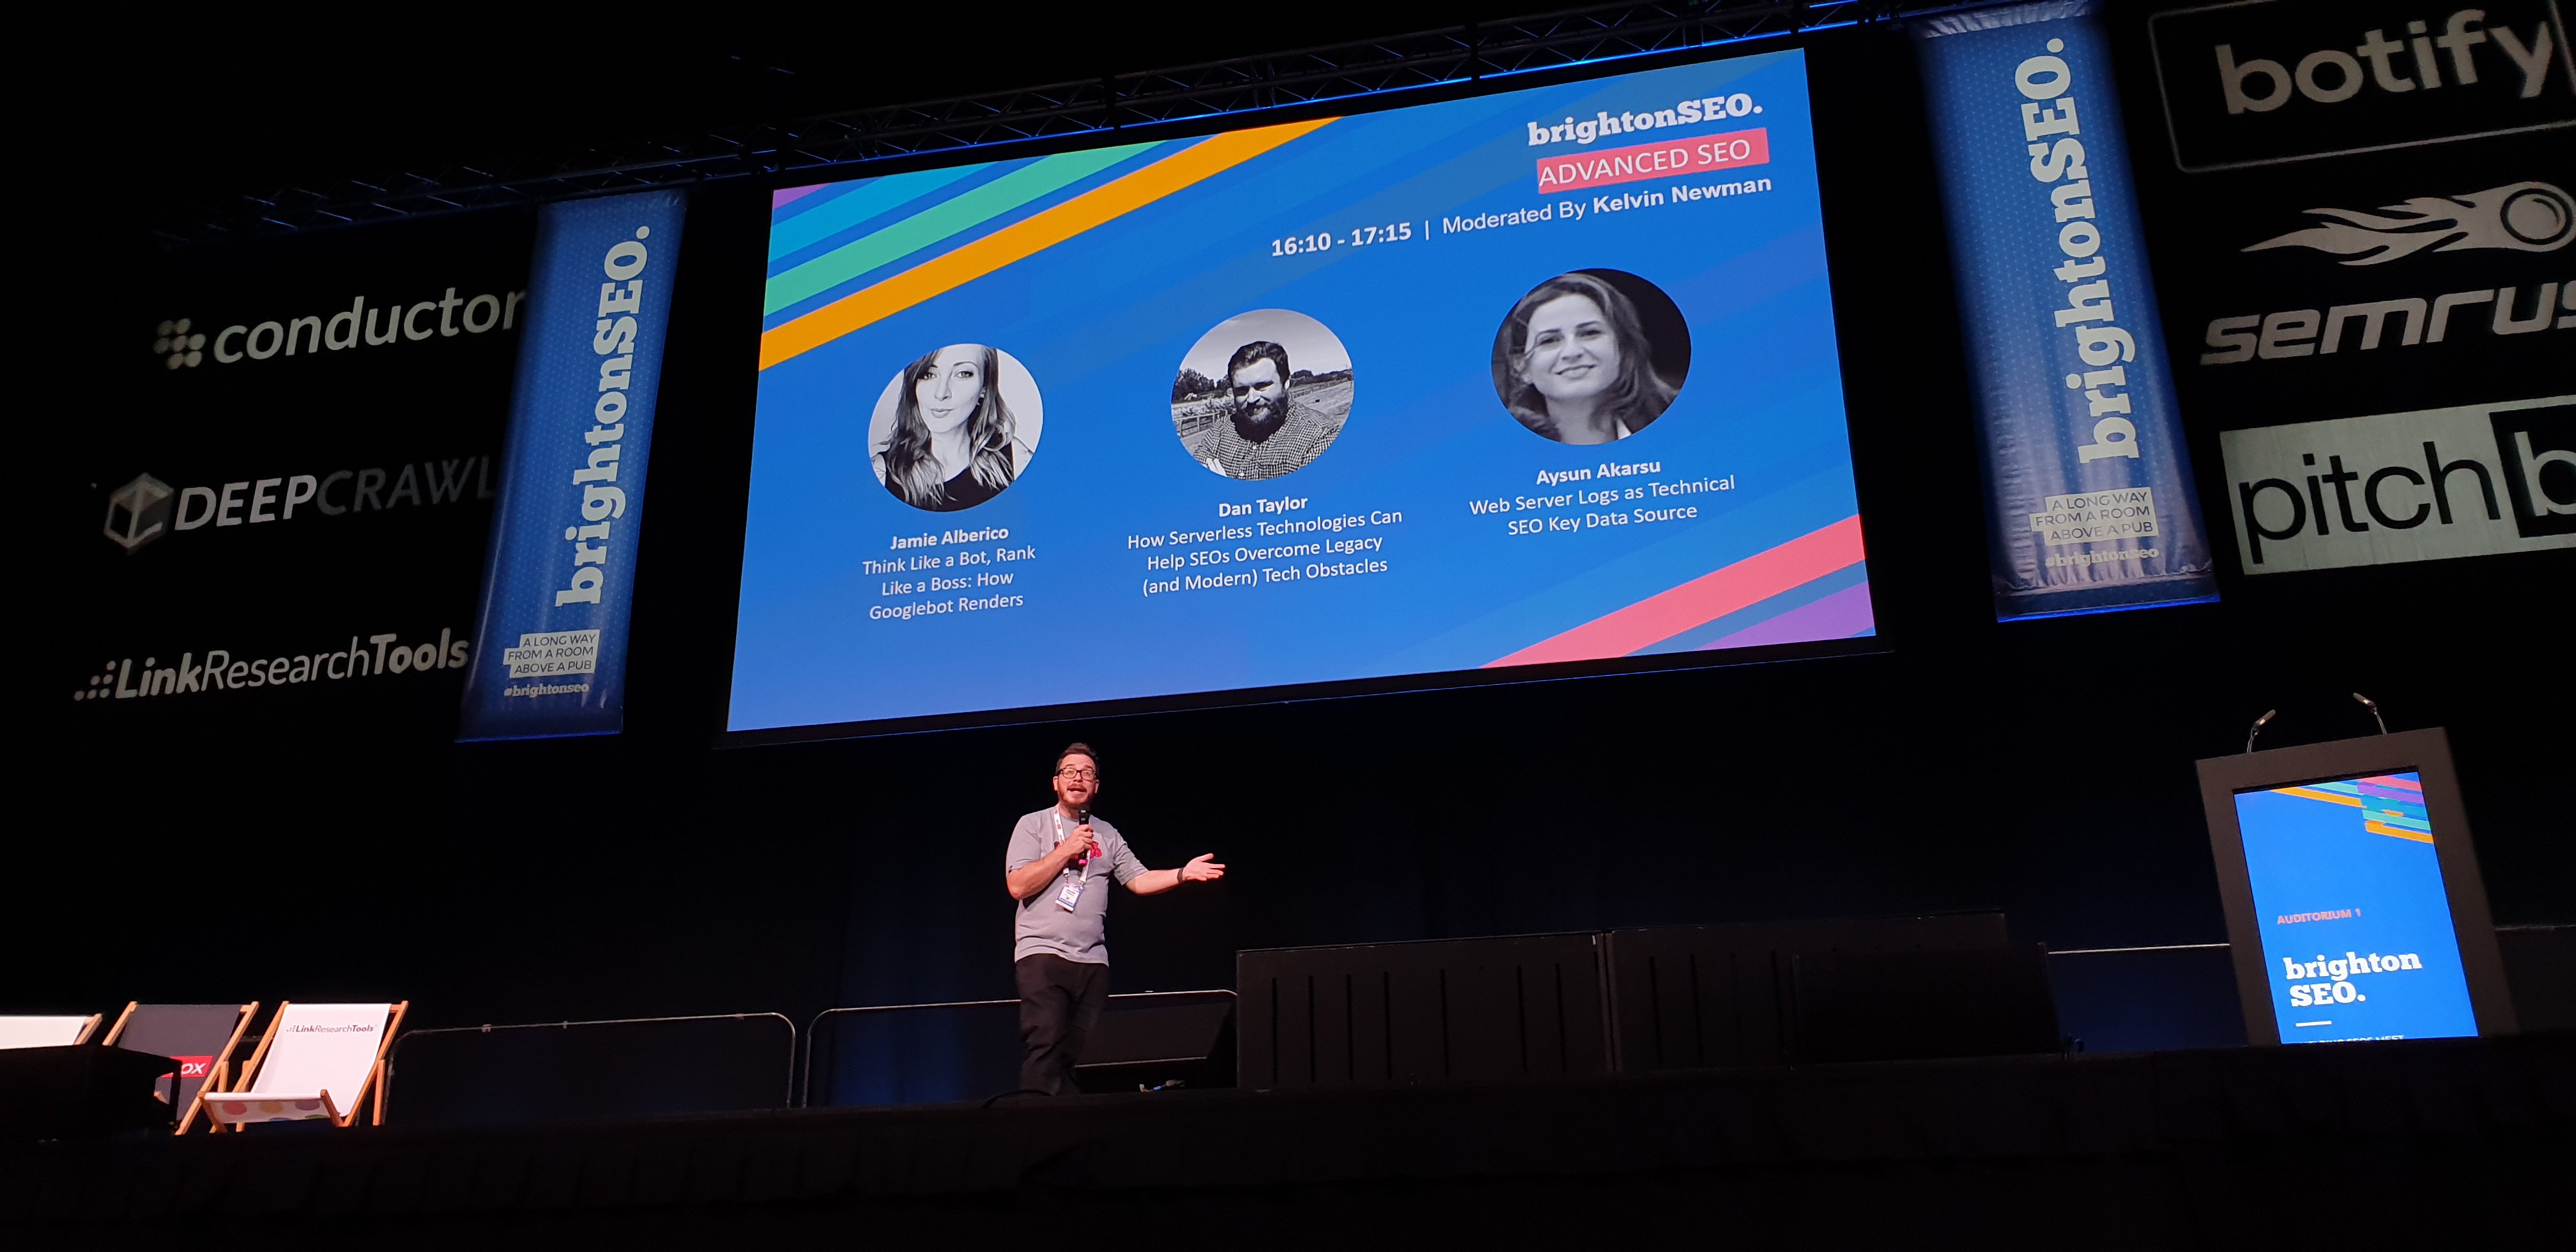 BrightonSEO: What Can a Social Media Marketer Learn From Going to an SEO  Conference?